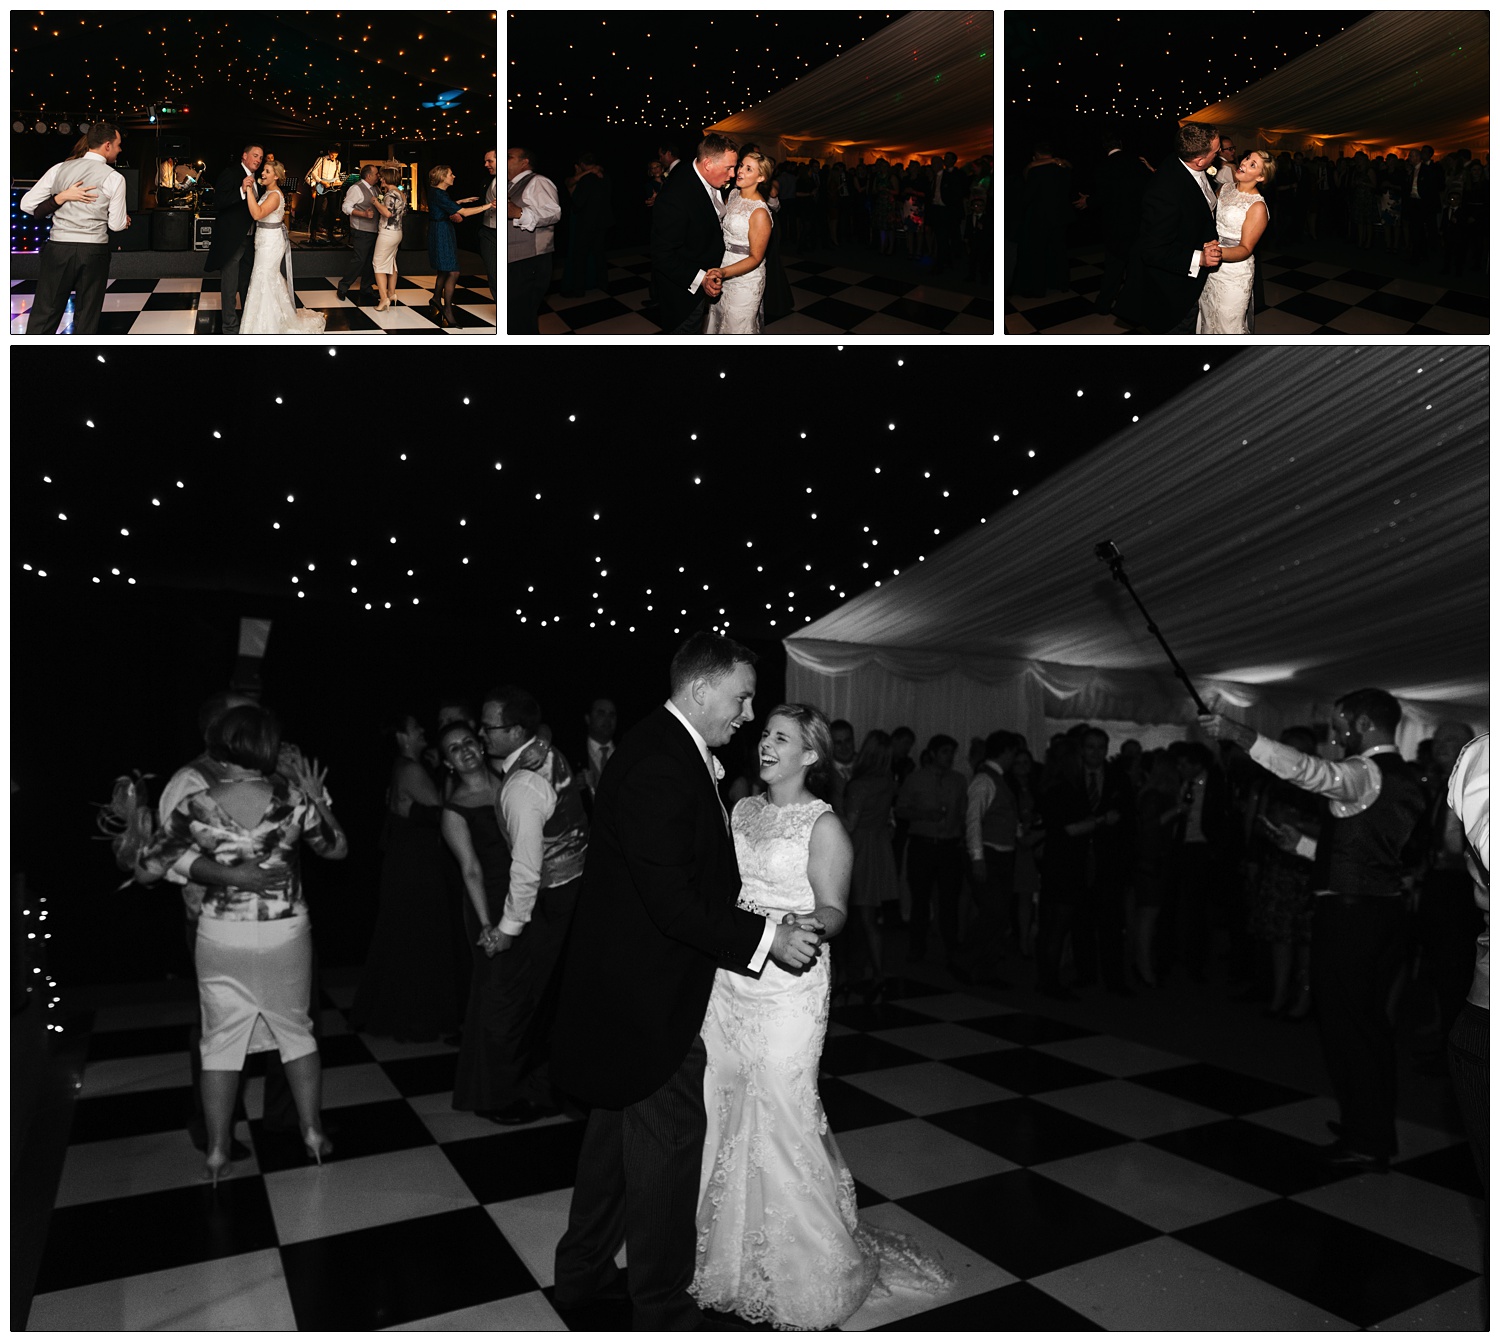 First dance between bride and groom on a black and white chequered floor. The ceiling is black with tiny lights.